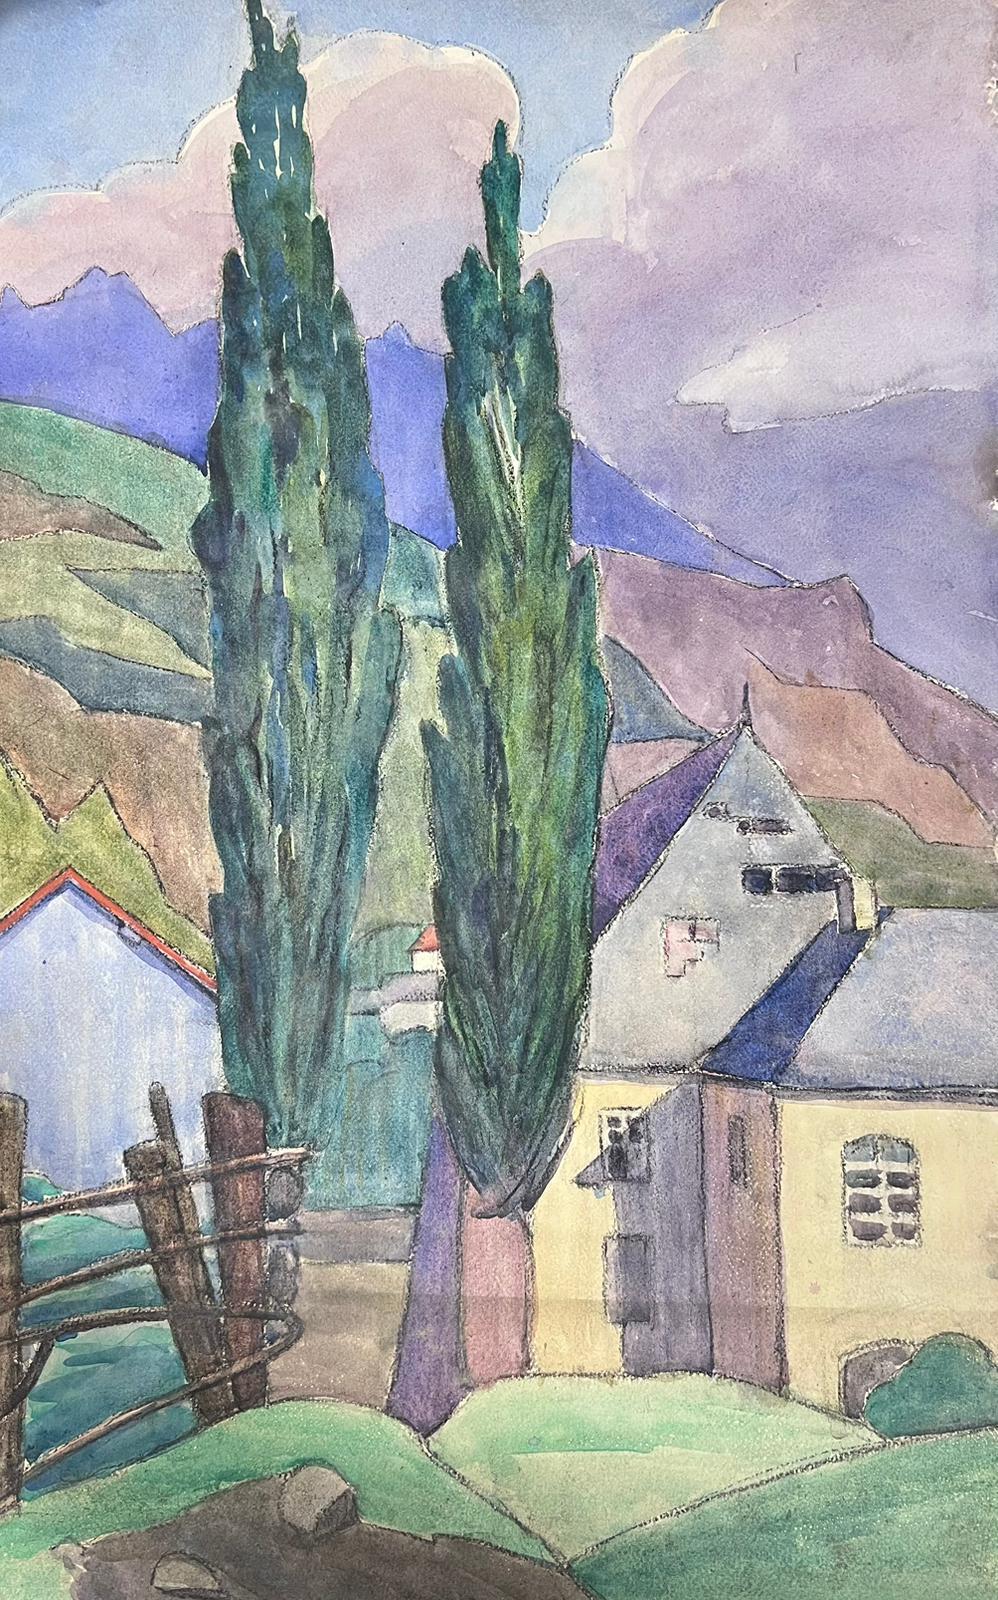 1930's French Impressionist Tall Green Cyprus Trees Purple Mountain Landscape